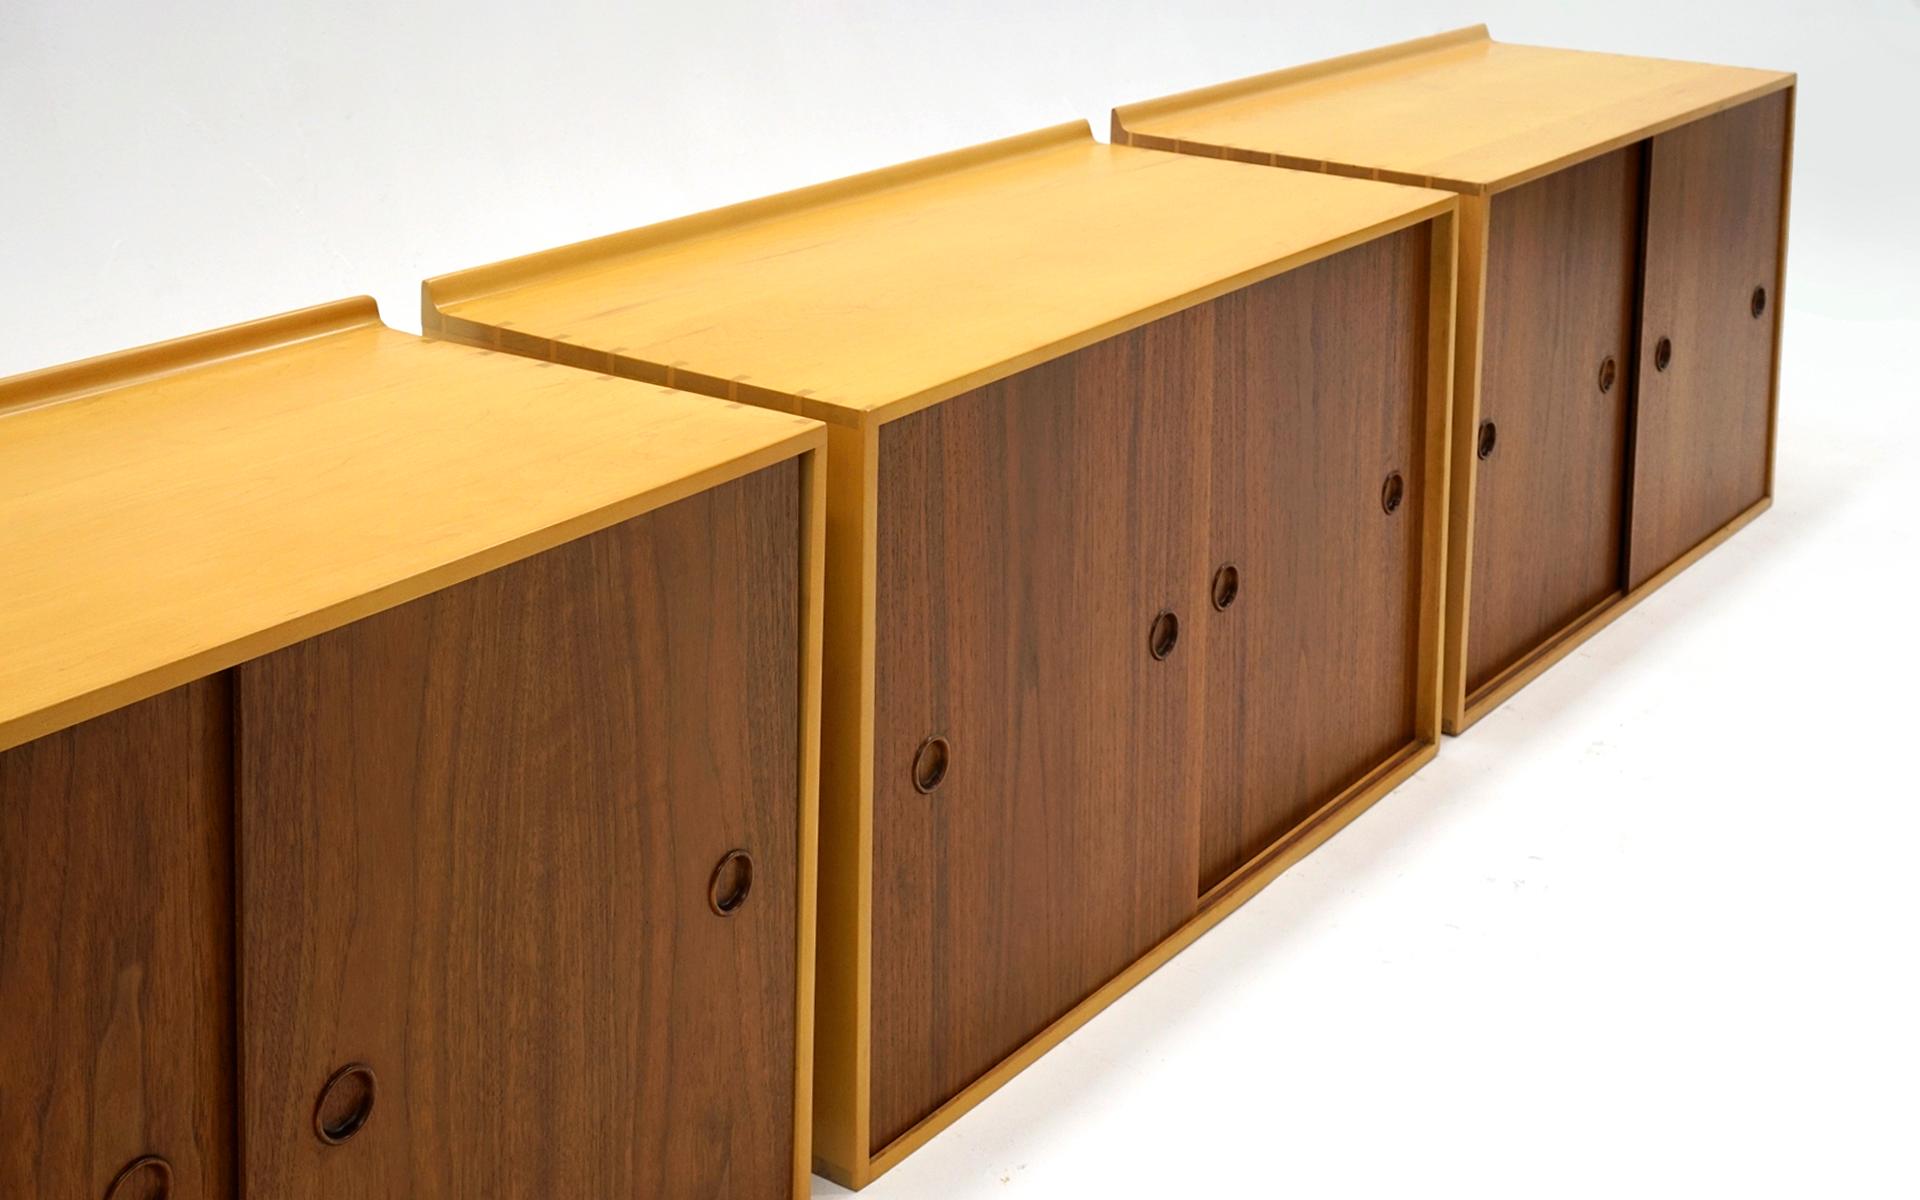 Wall Mounted Cabinets by Finn Juhl for Baker, Walnut and Birch, Great Condition For Sale 4